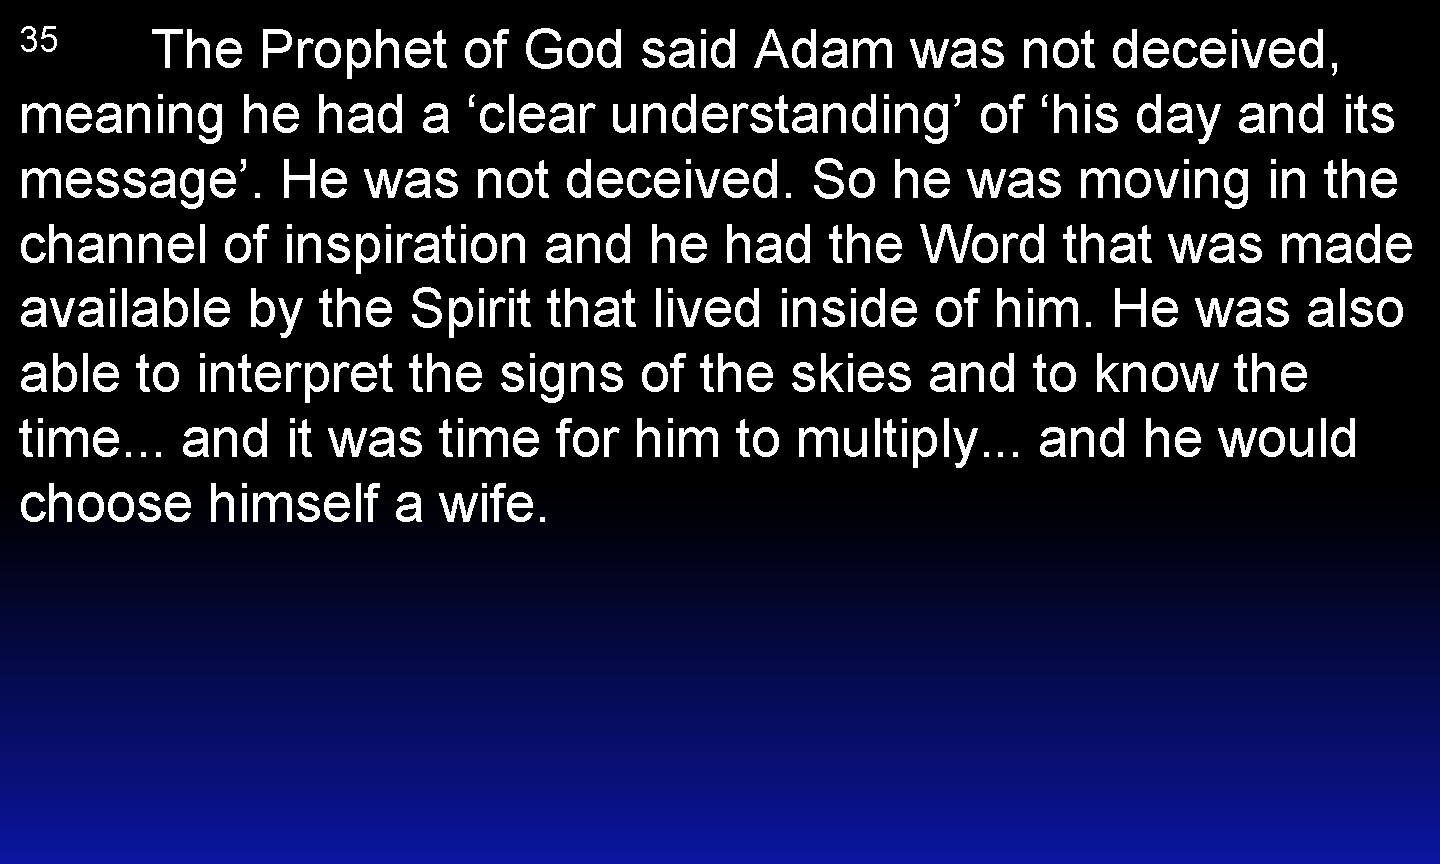 The Prophet of God said Adam was not deceived, meaning he had a ‘clear